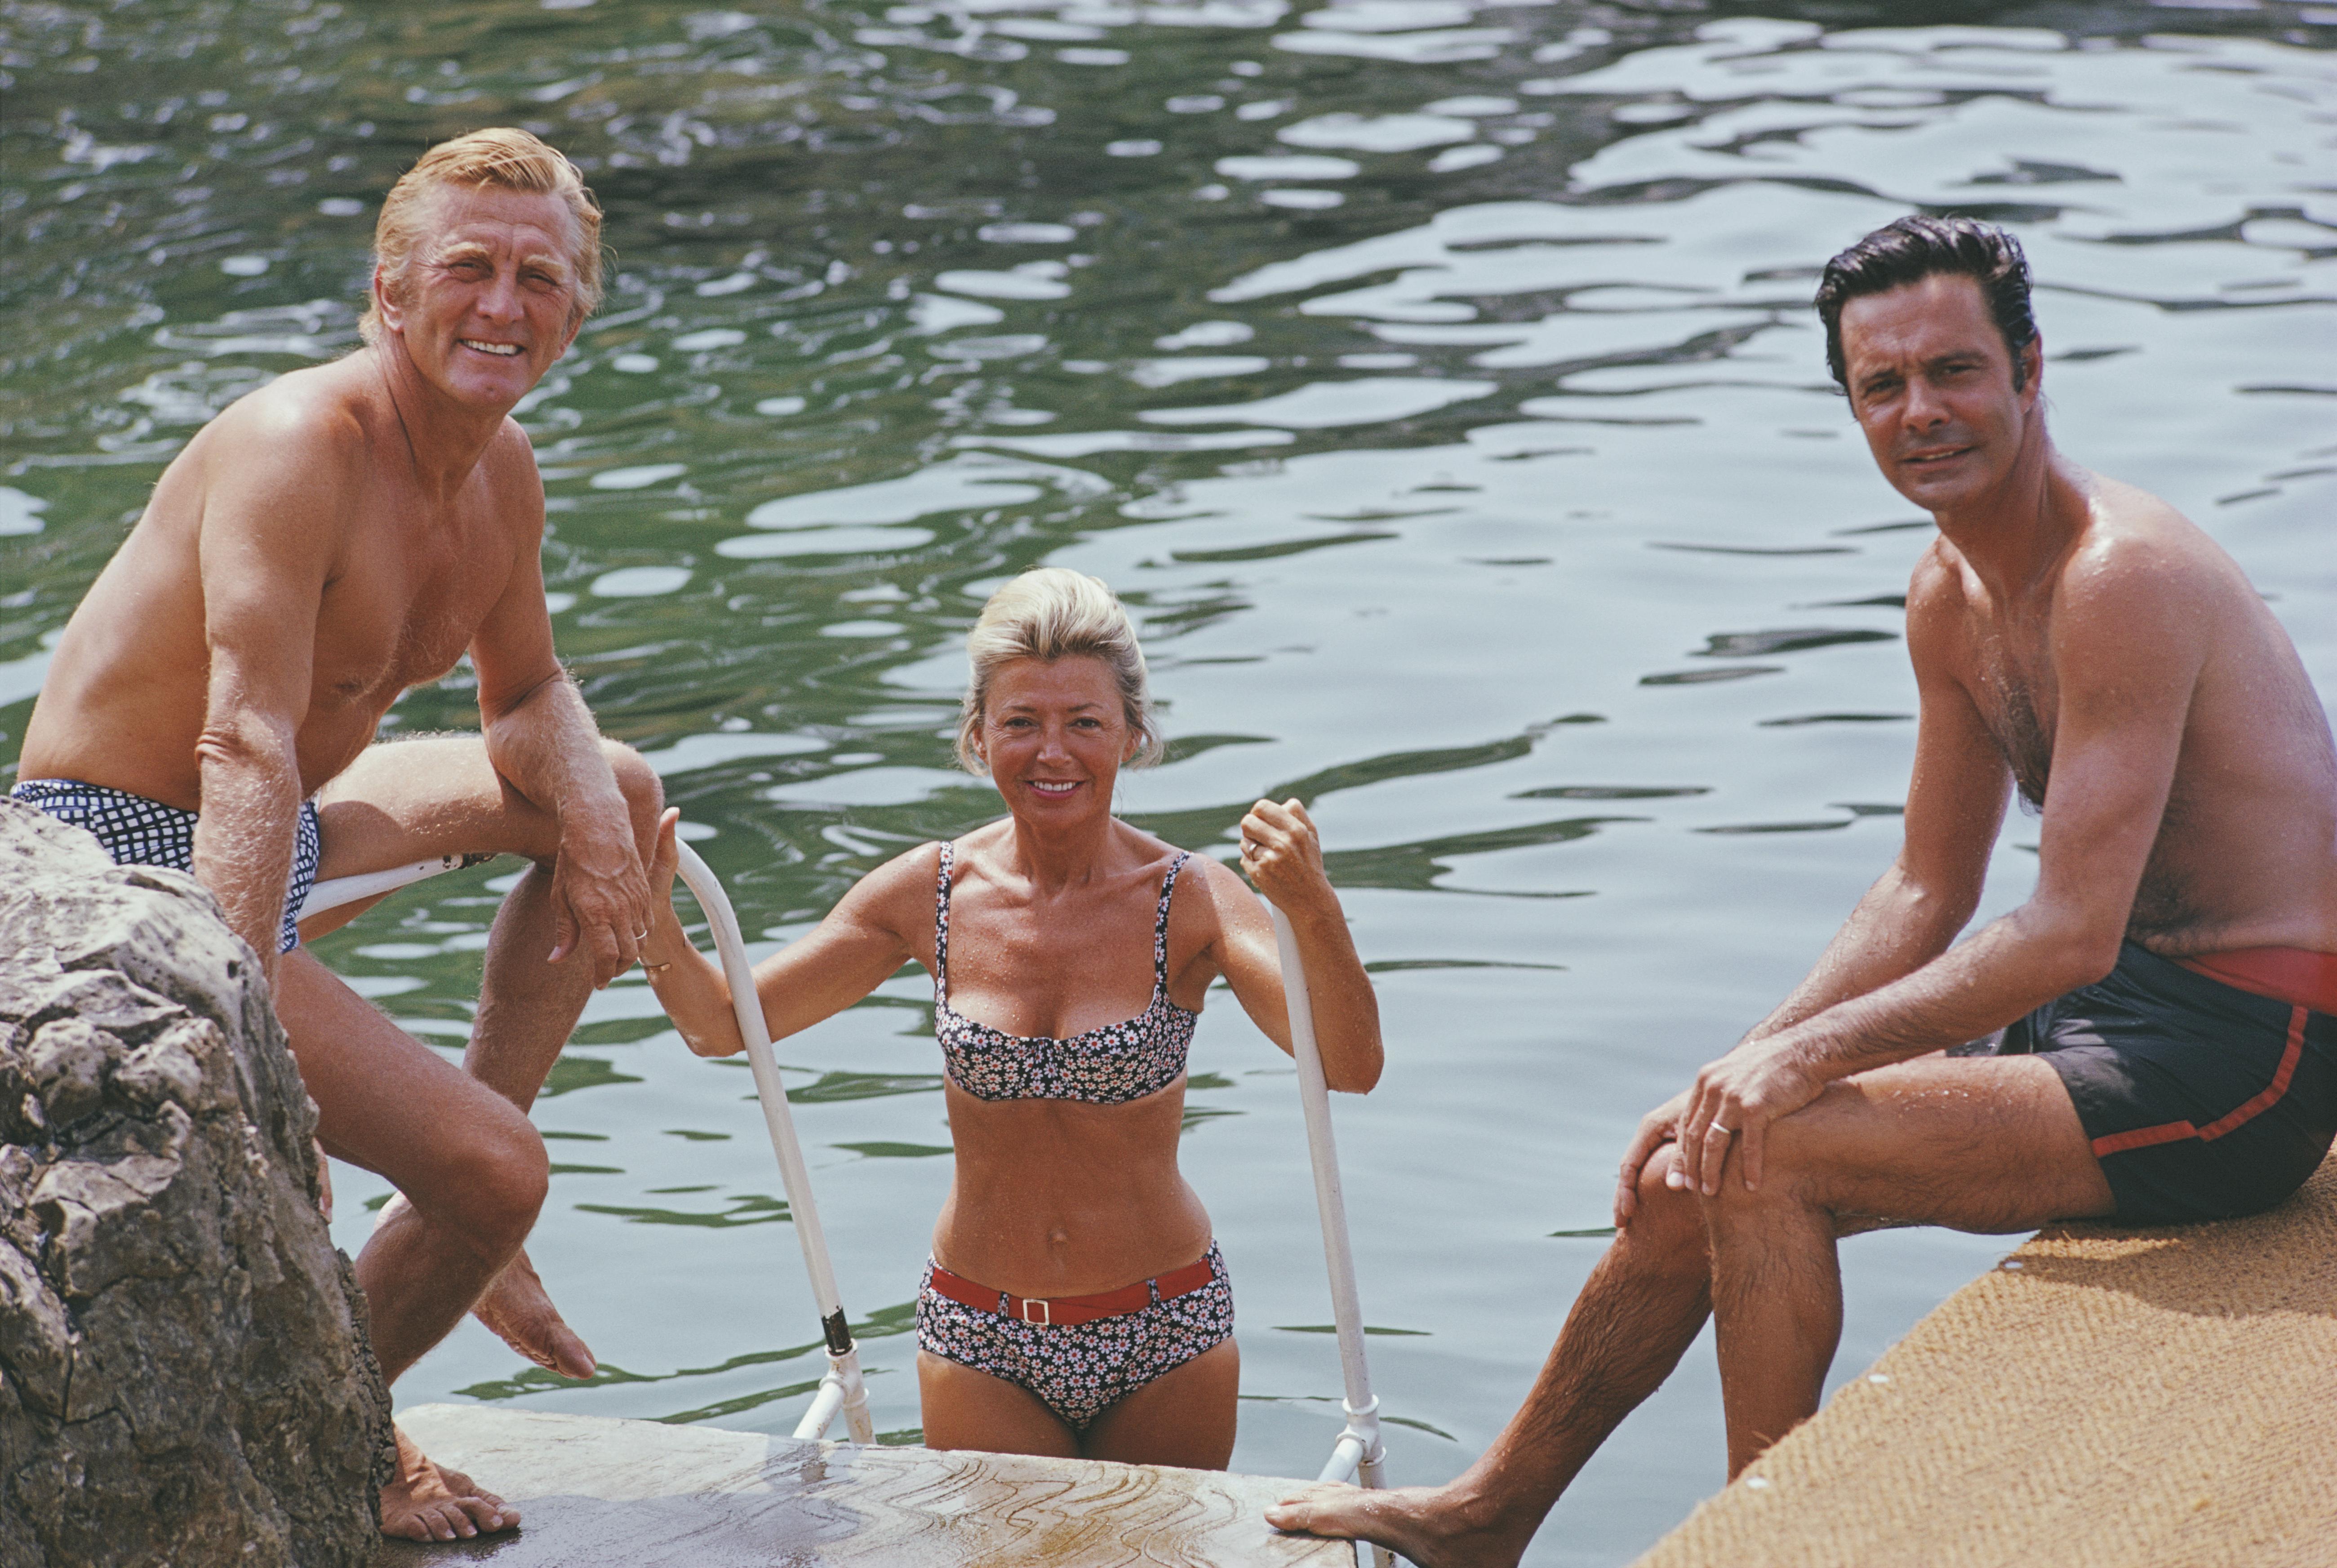 'Actors In Antibes' 1969 Slim Aarons Limited Estate Edition Print 

Actors Kirk Douglas (left), Louis Jourdan and Jourdan's wife Quiquie enjoying the water at the Hotel du Cap-Eden-Roc in Antibes on the French Riviera, August 1969. (Photo by Slim